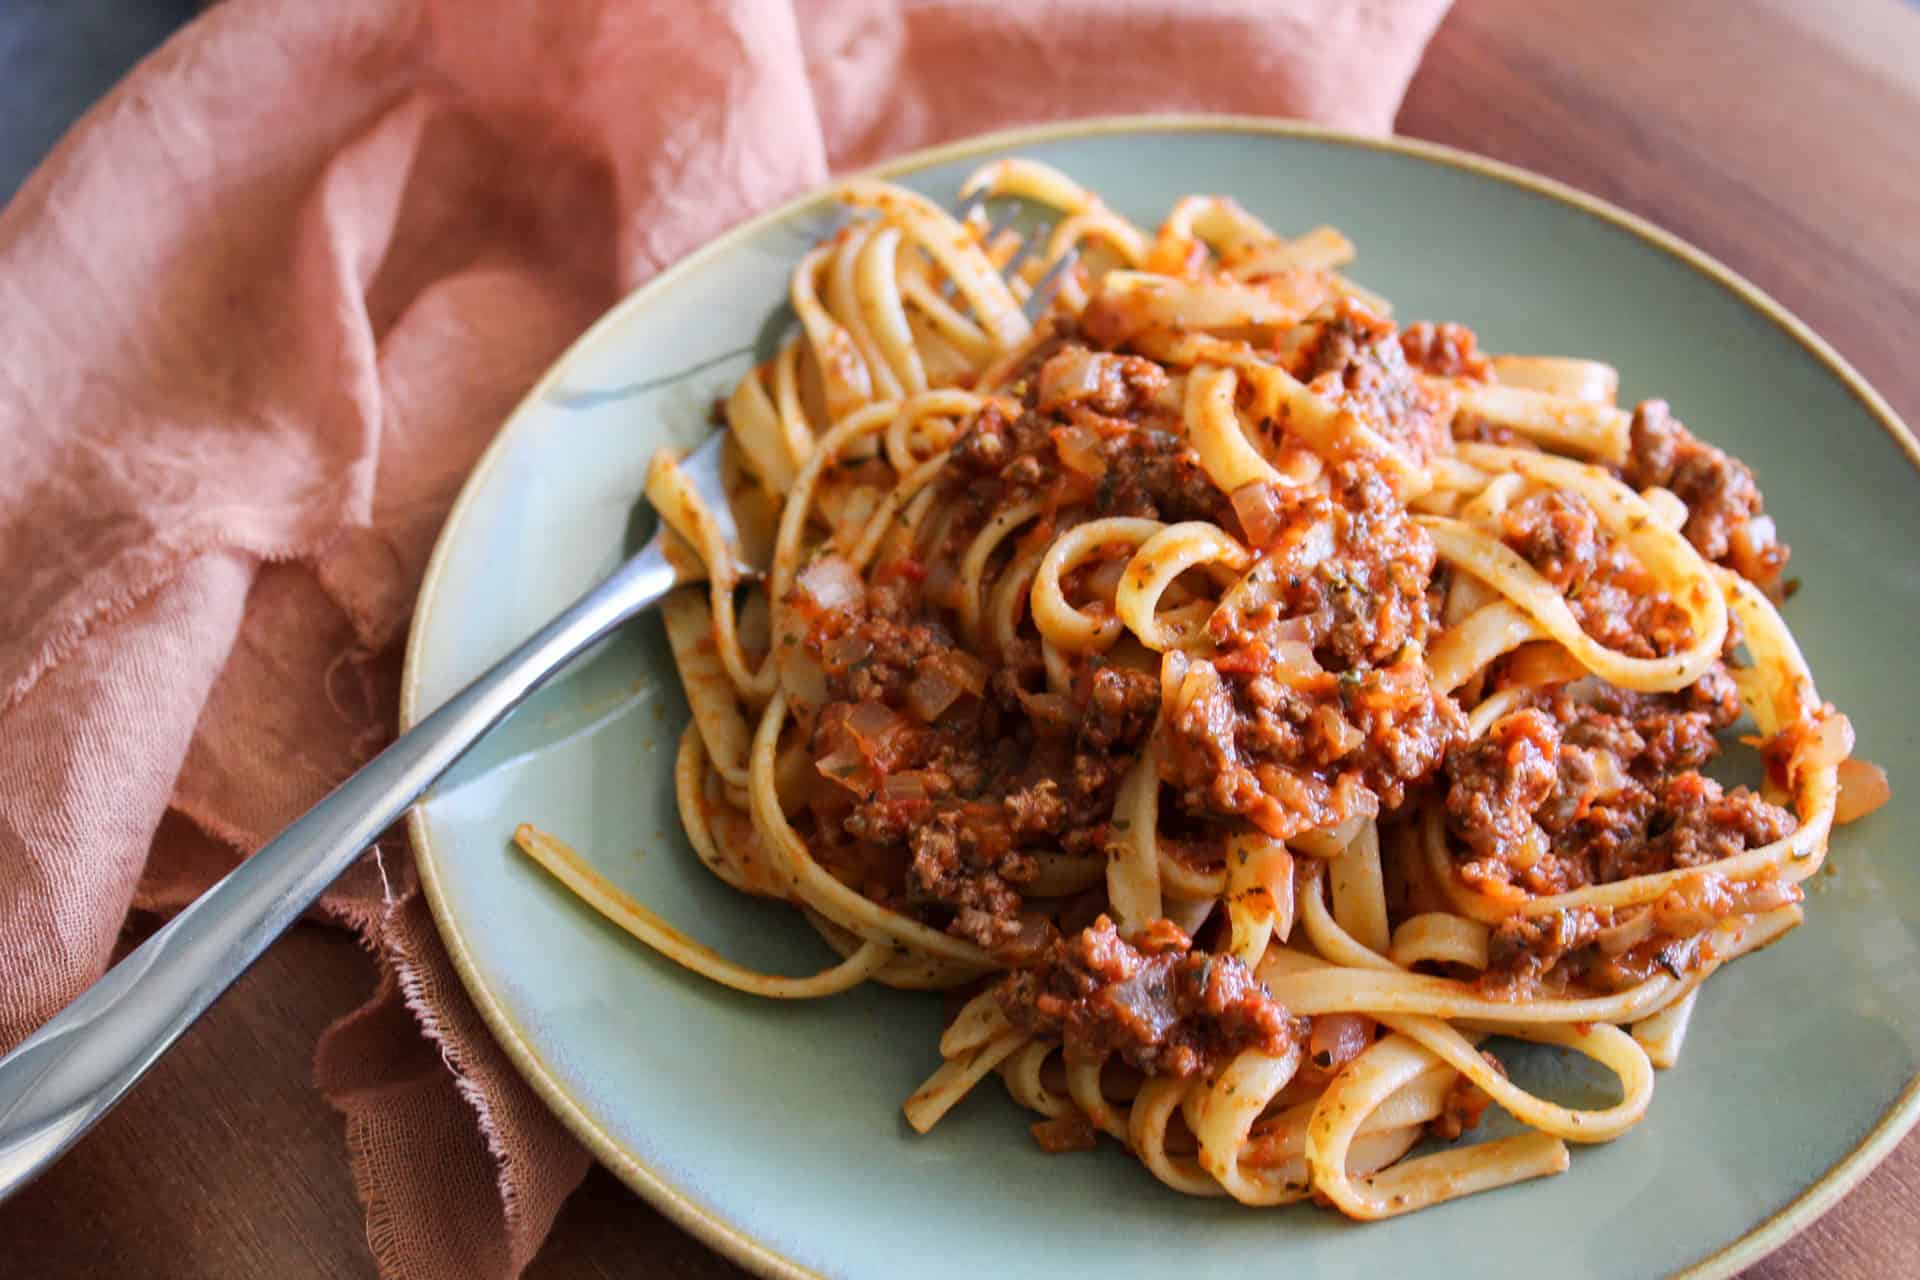 A plate of fettuccine with a hearty Italian meat sauce